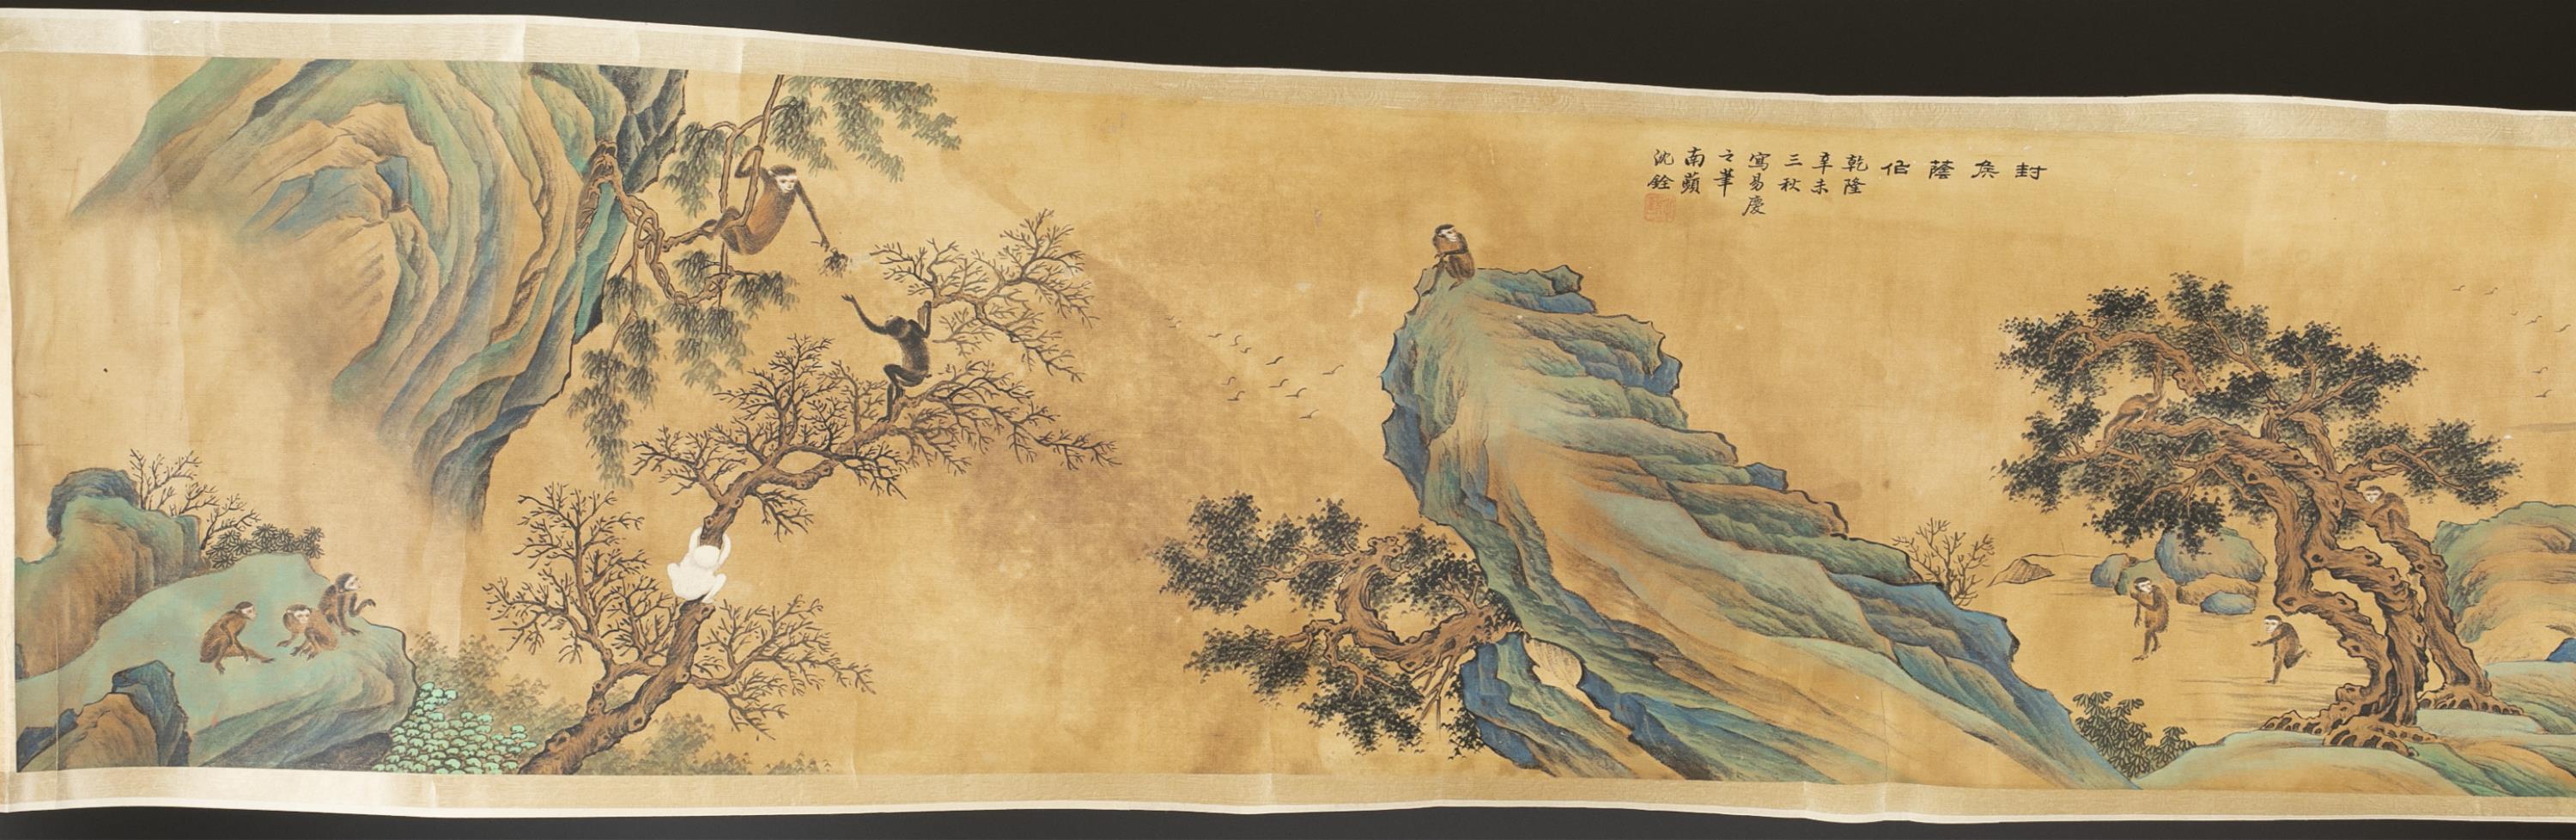 Long Chinese hand scroll of monkeys. - Image 2 of 9